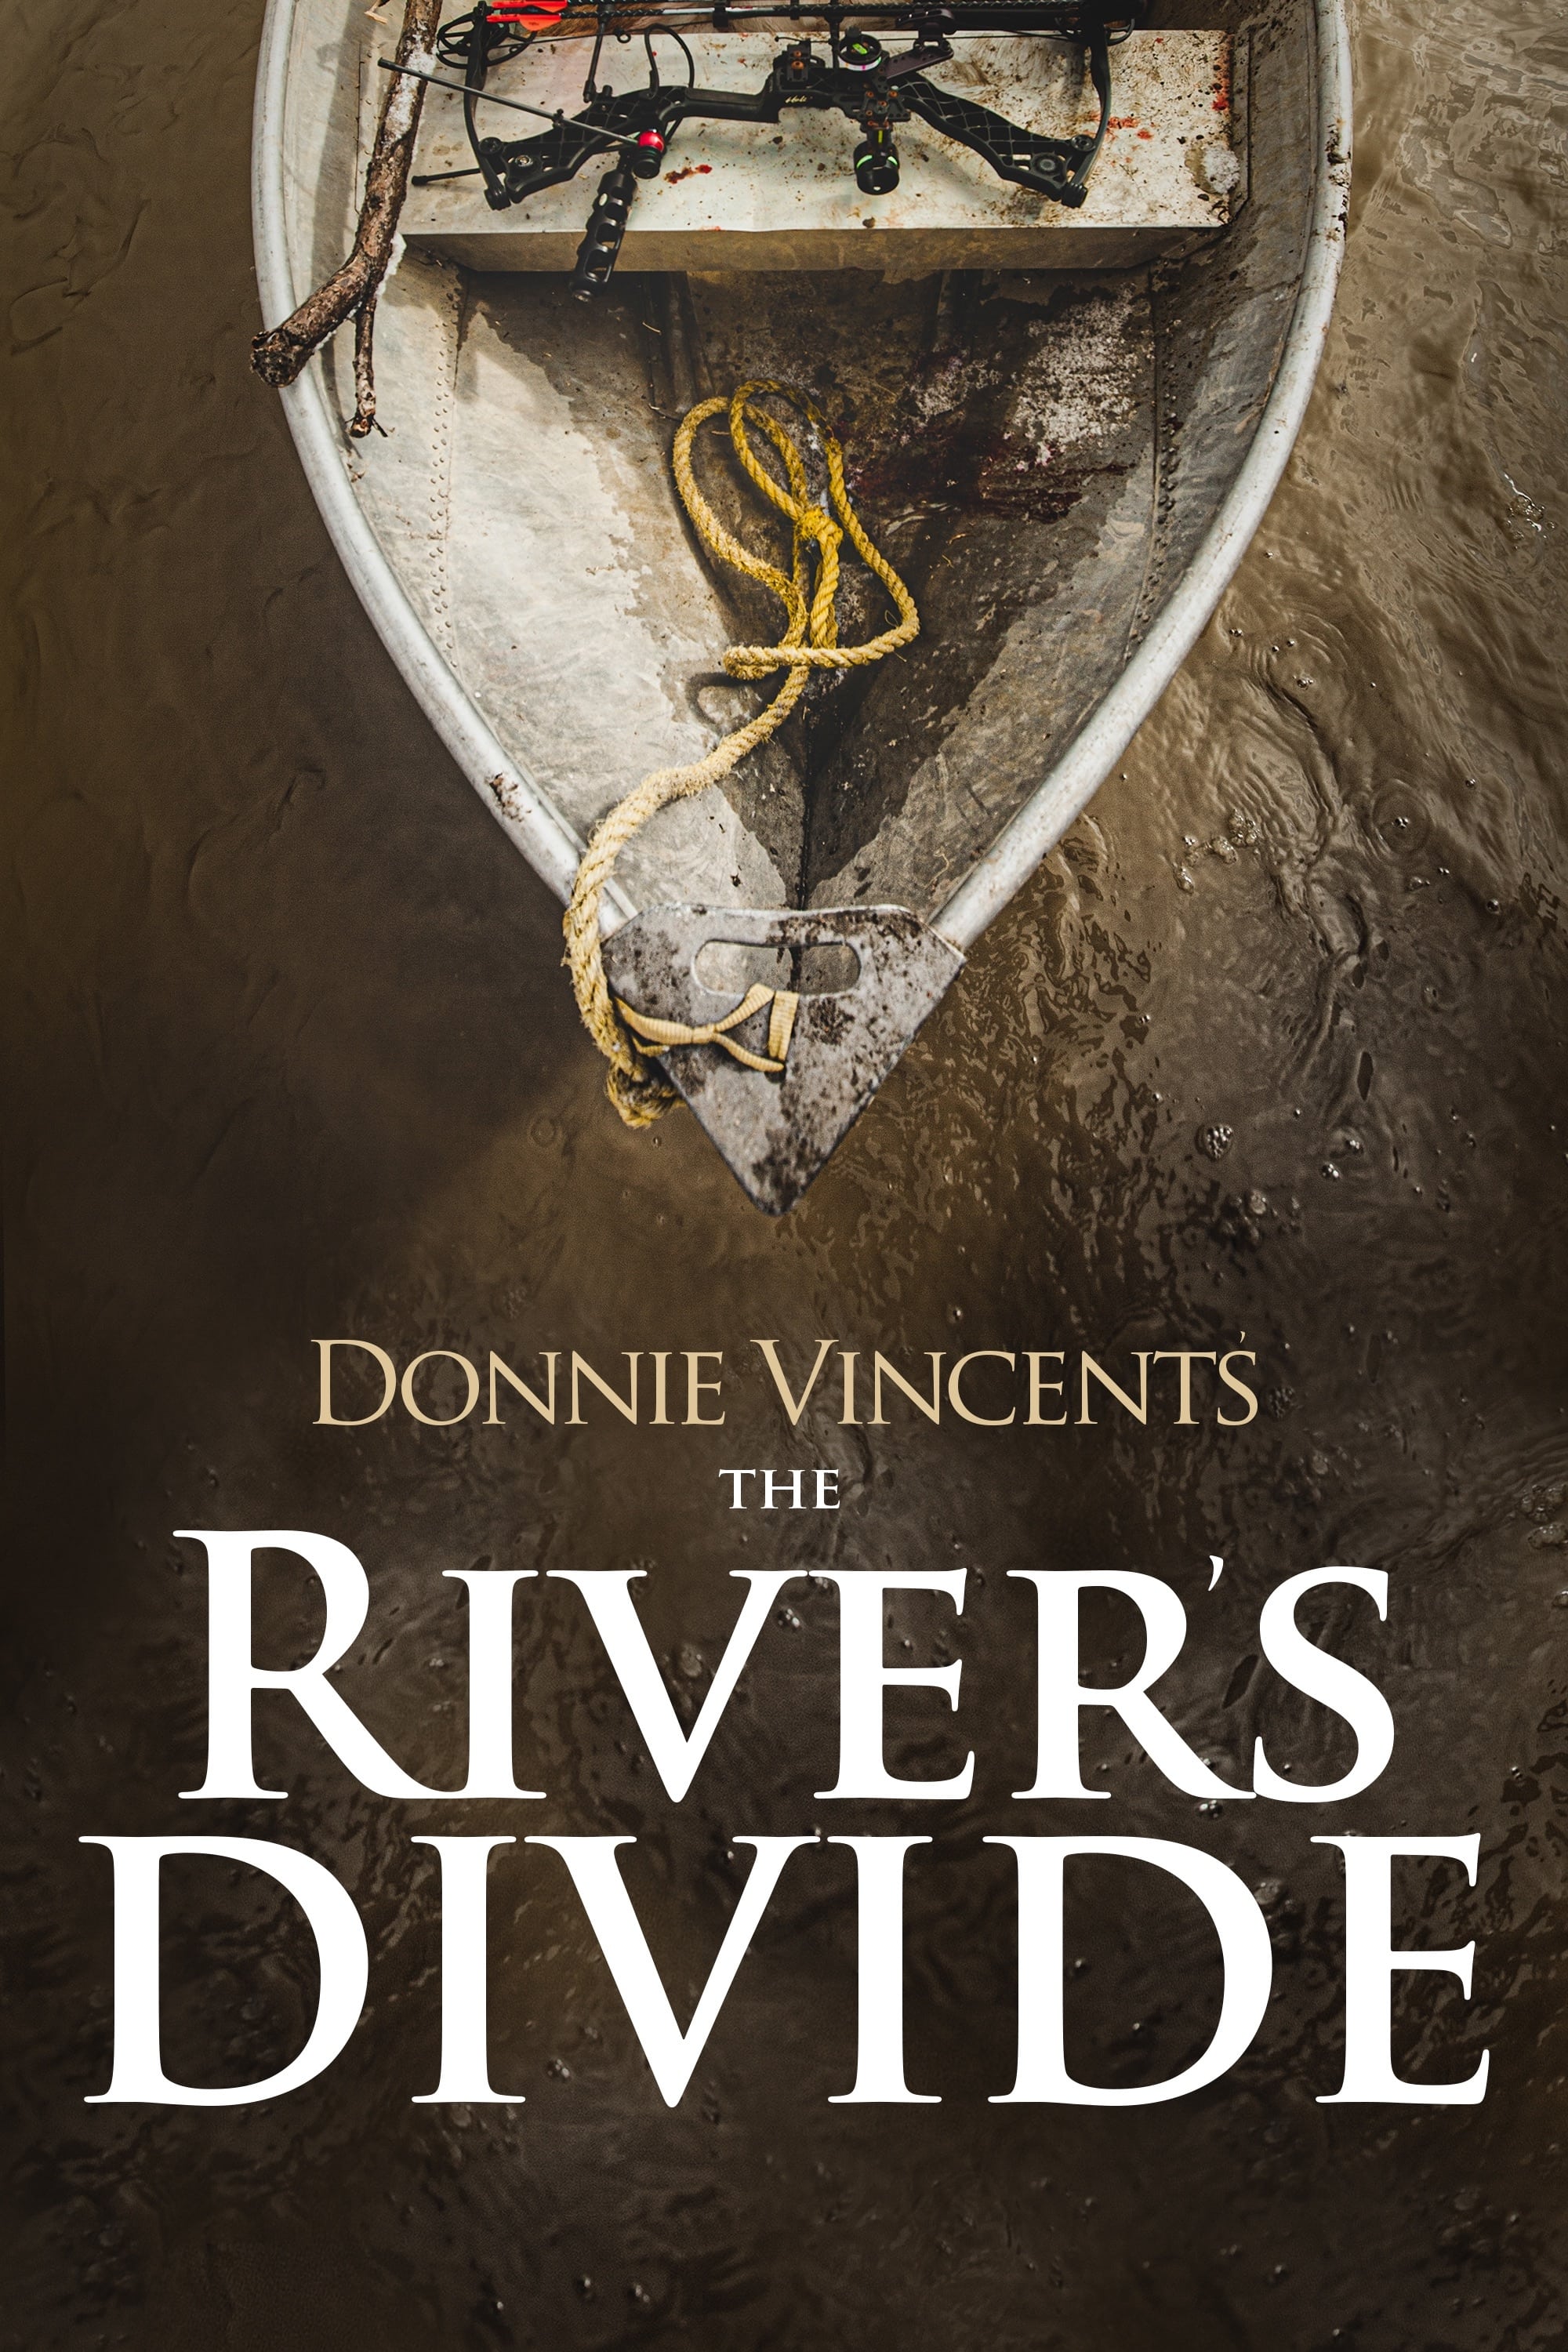 The River's Divide